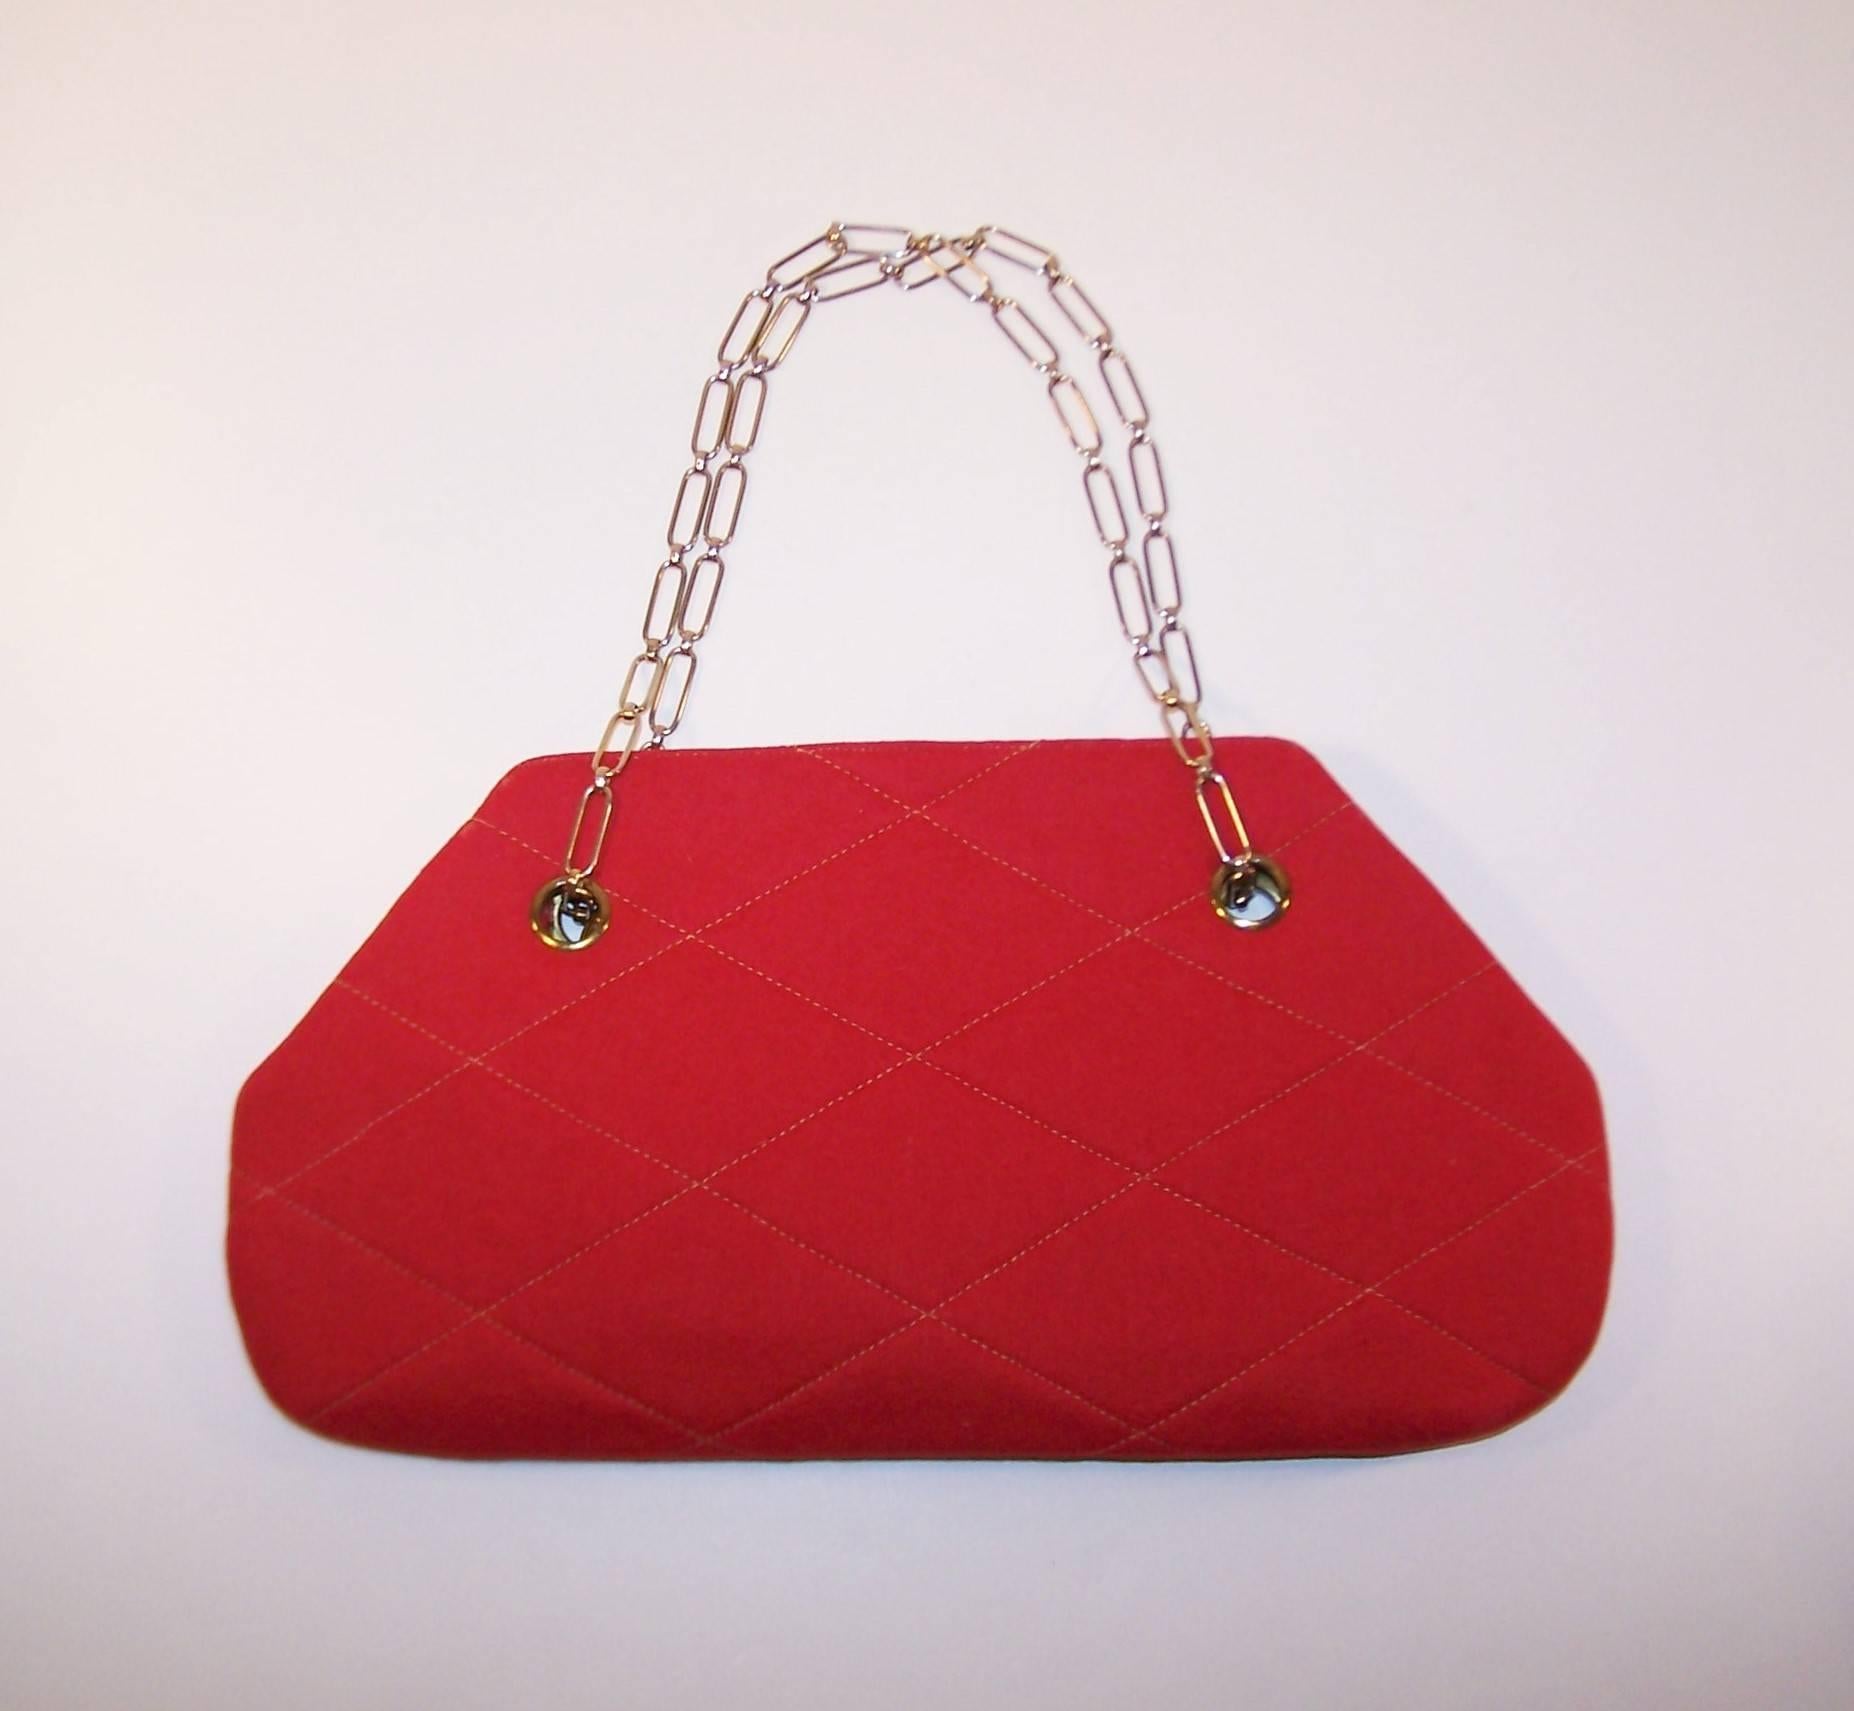 Stylish texture with mod bells and whistles!  This 1960's handbag features an envelope shape in a red wool quilted body with complimentary striped interior and a clever chain handle which converts from short to long.  The thin silhouette easily